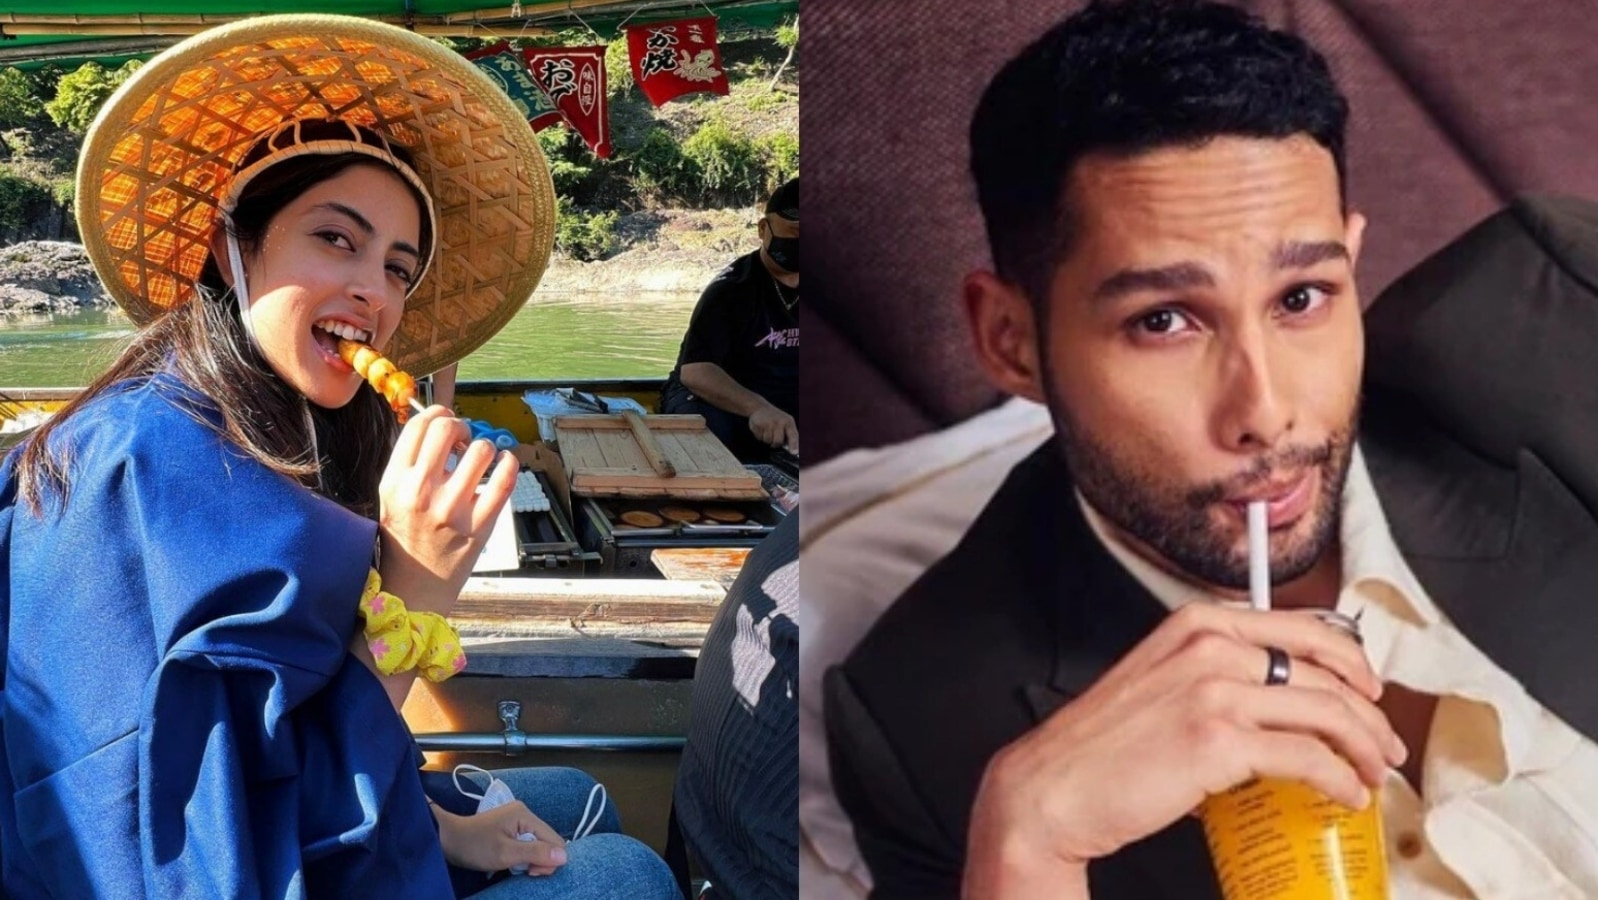 Navya Naveli Nanda shares pics from her Sunday in Japan as fans seek more clues about Siddhant Chaturvedi